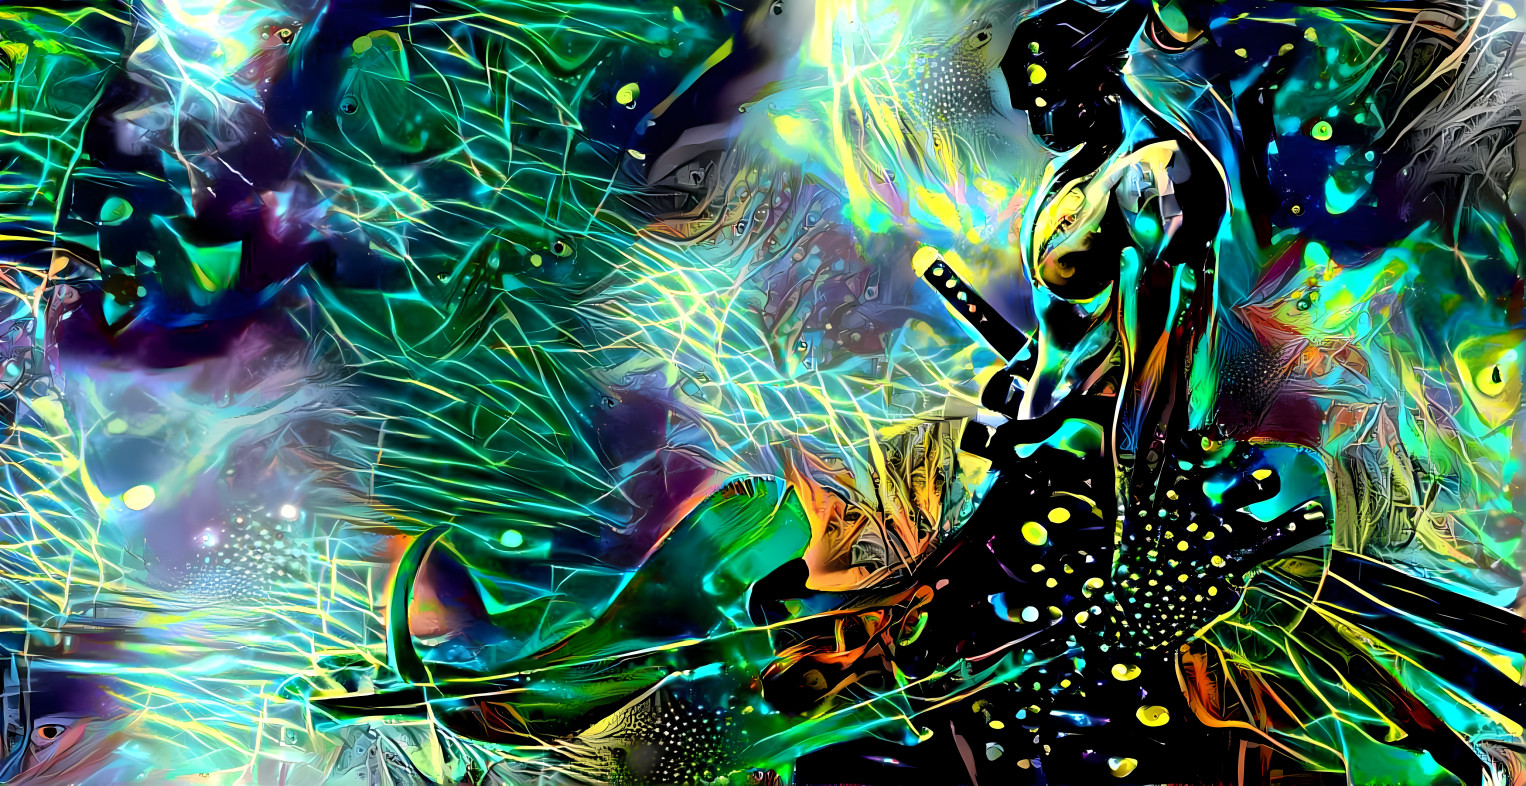 Zoro in abstract form